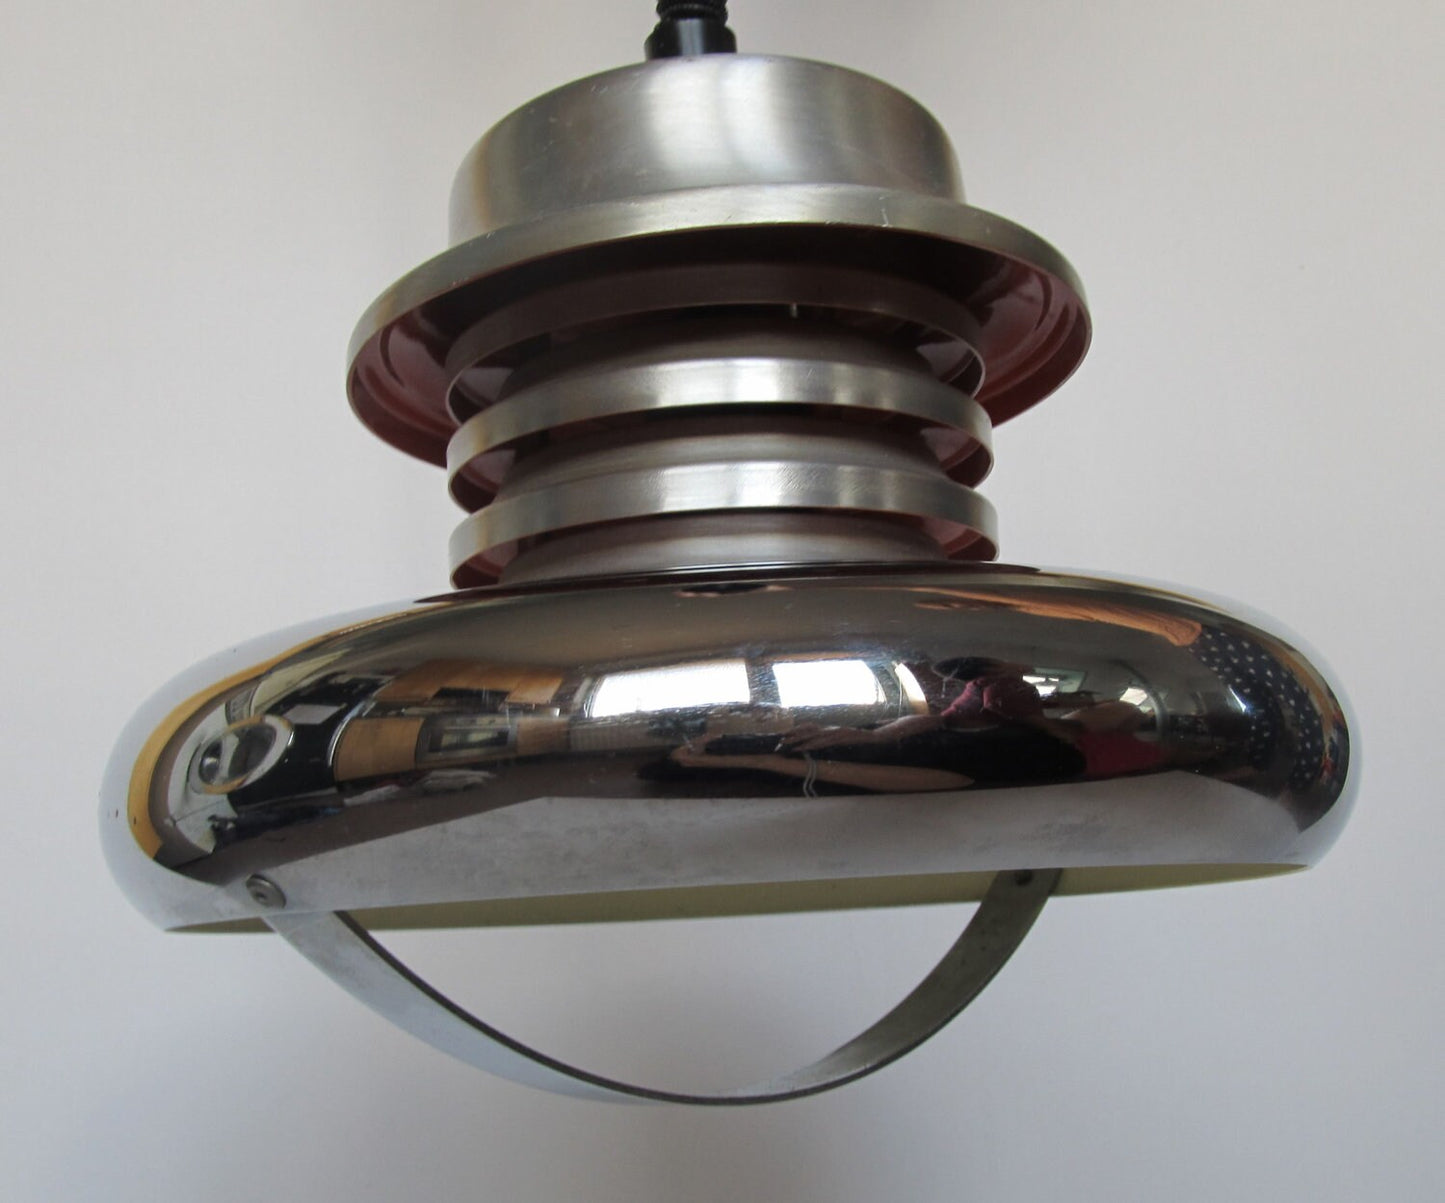 Metal 1970s vintage hanging light with pullcord